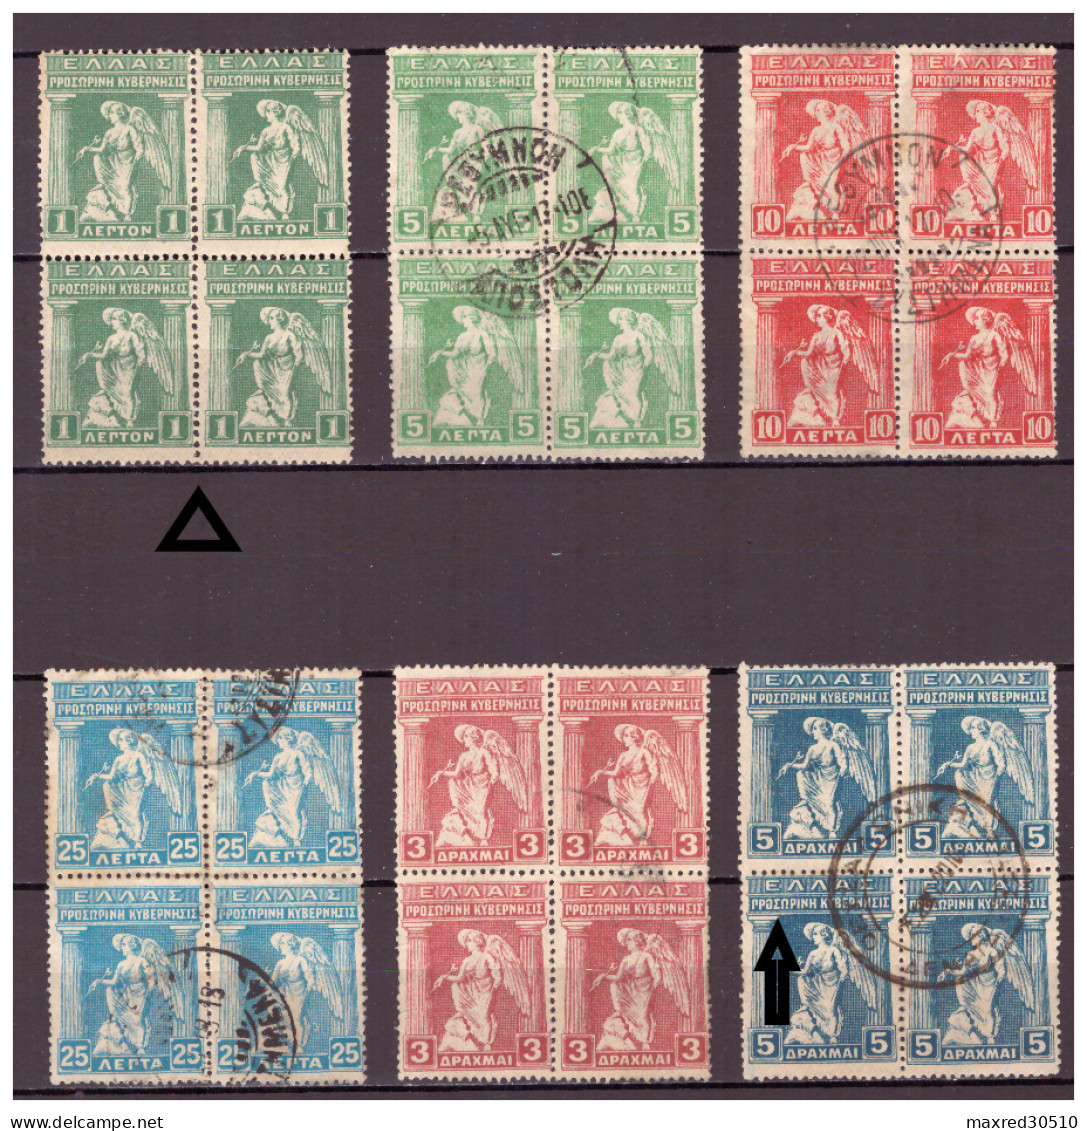 GREECE 1917 6 BLOCKS OF 4 OF THE "PROVISIONAL GOVERNMENT ISSUE", AT THE BL.4 OF 5DR. SEE ARROW AT THE "O", USED - Oblitérés